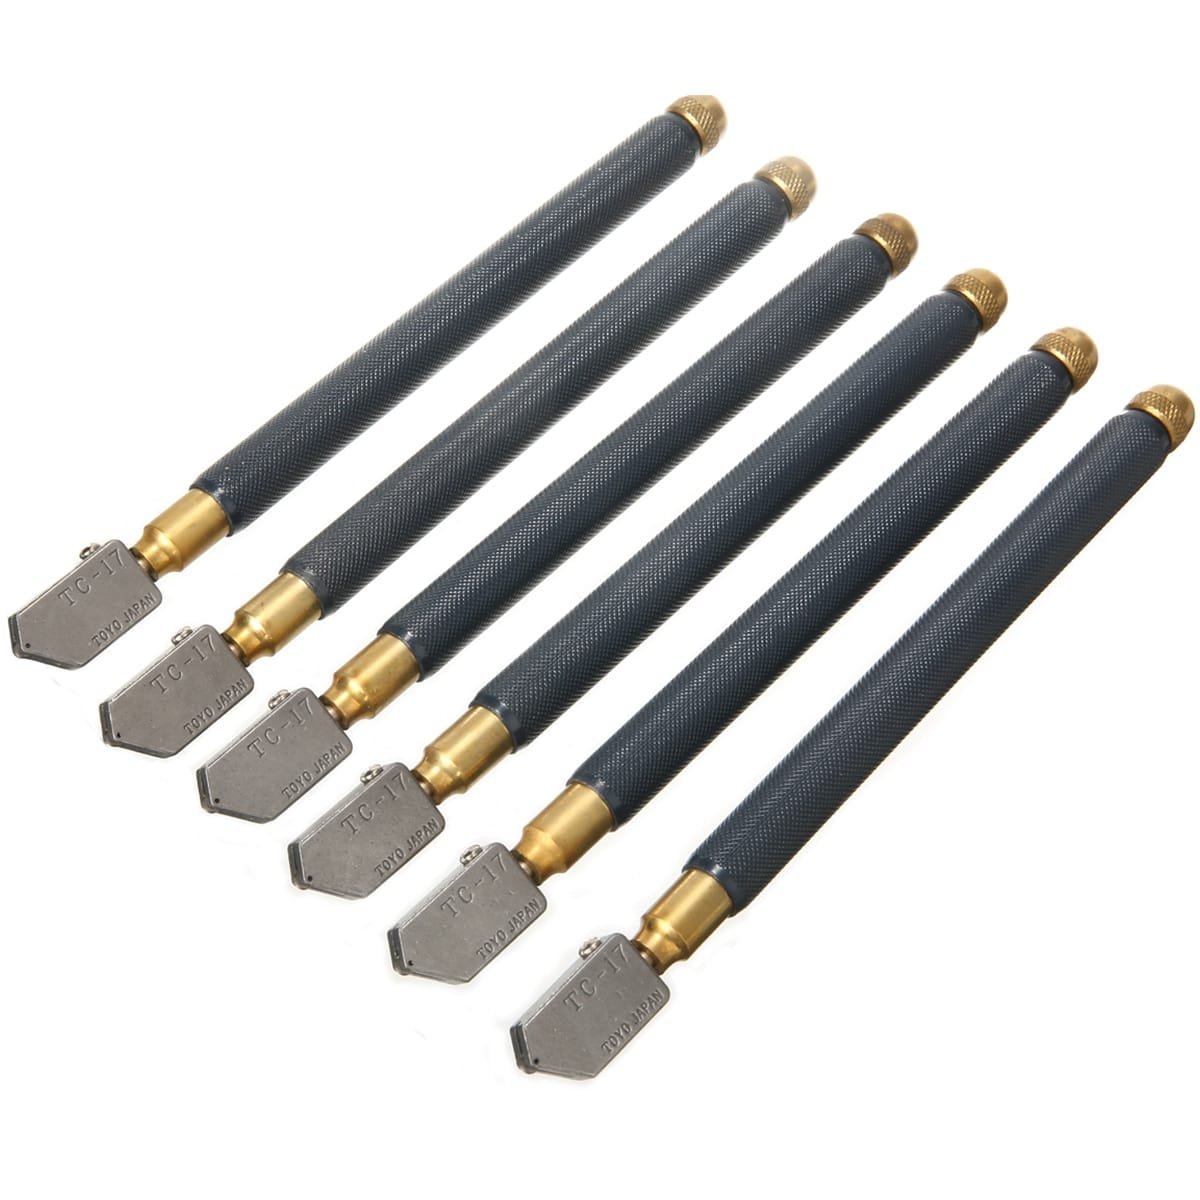 6pcs/Set 5-12mm Cutting Thickness Oil Glass Cutters Metal Handle Diamond Straight Head Cutting Tool for Cutting Glass Tile